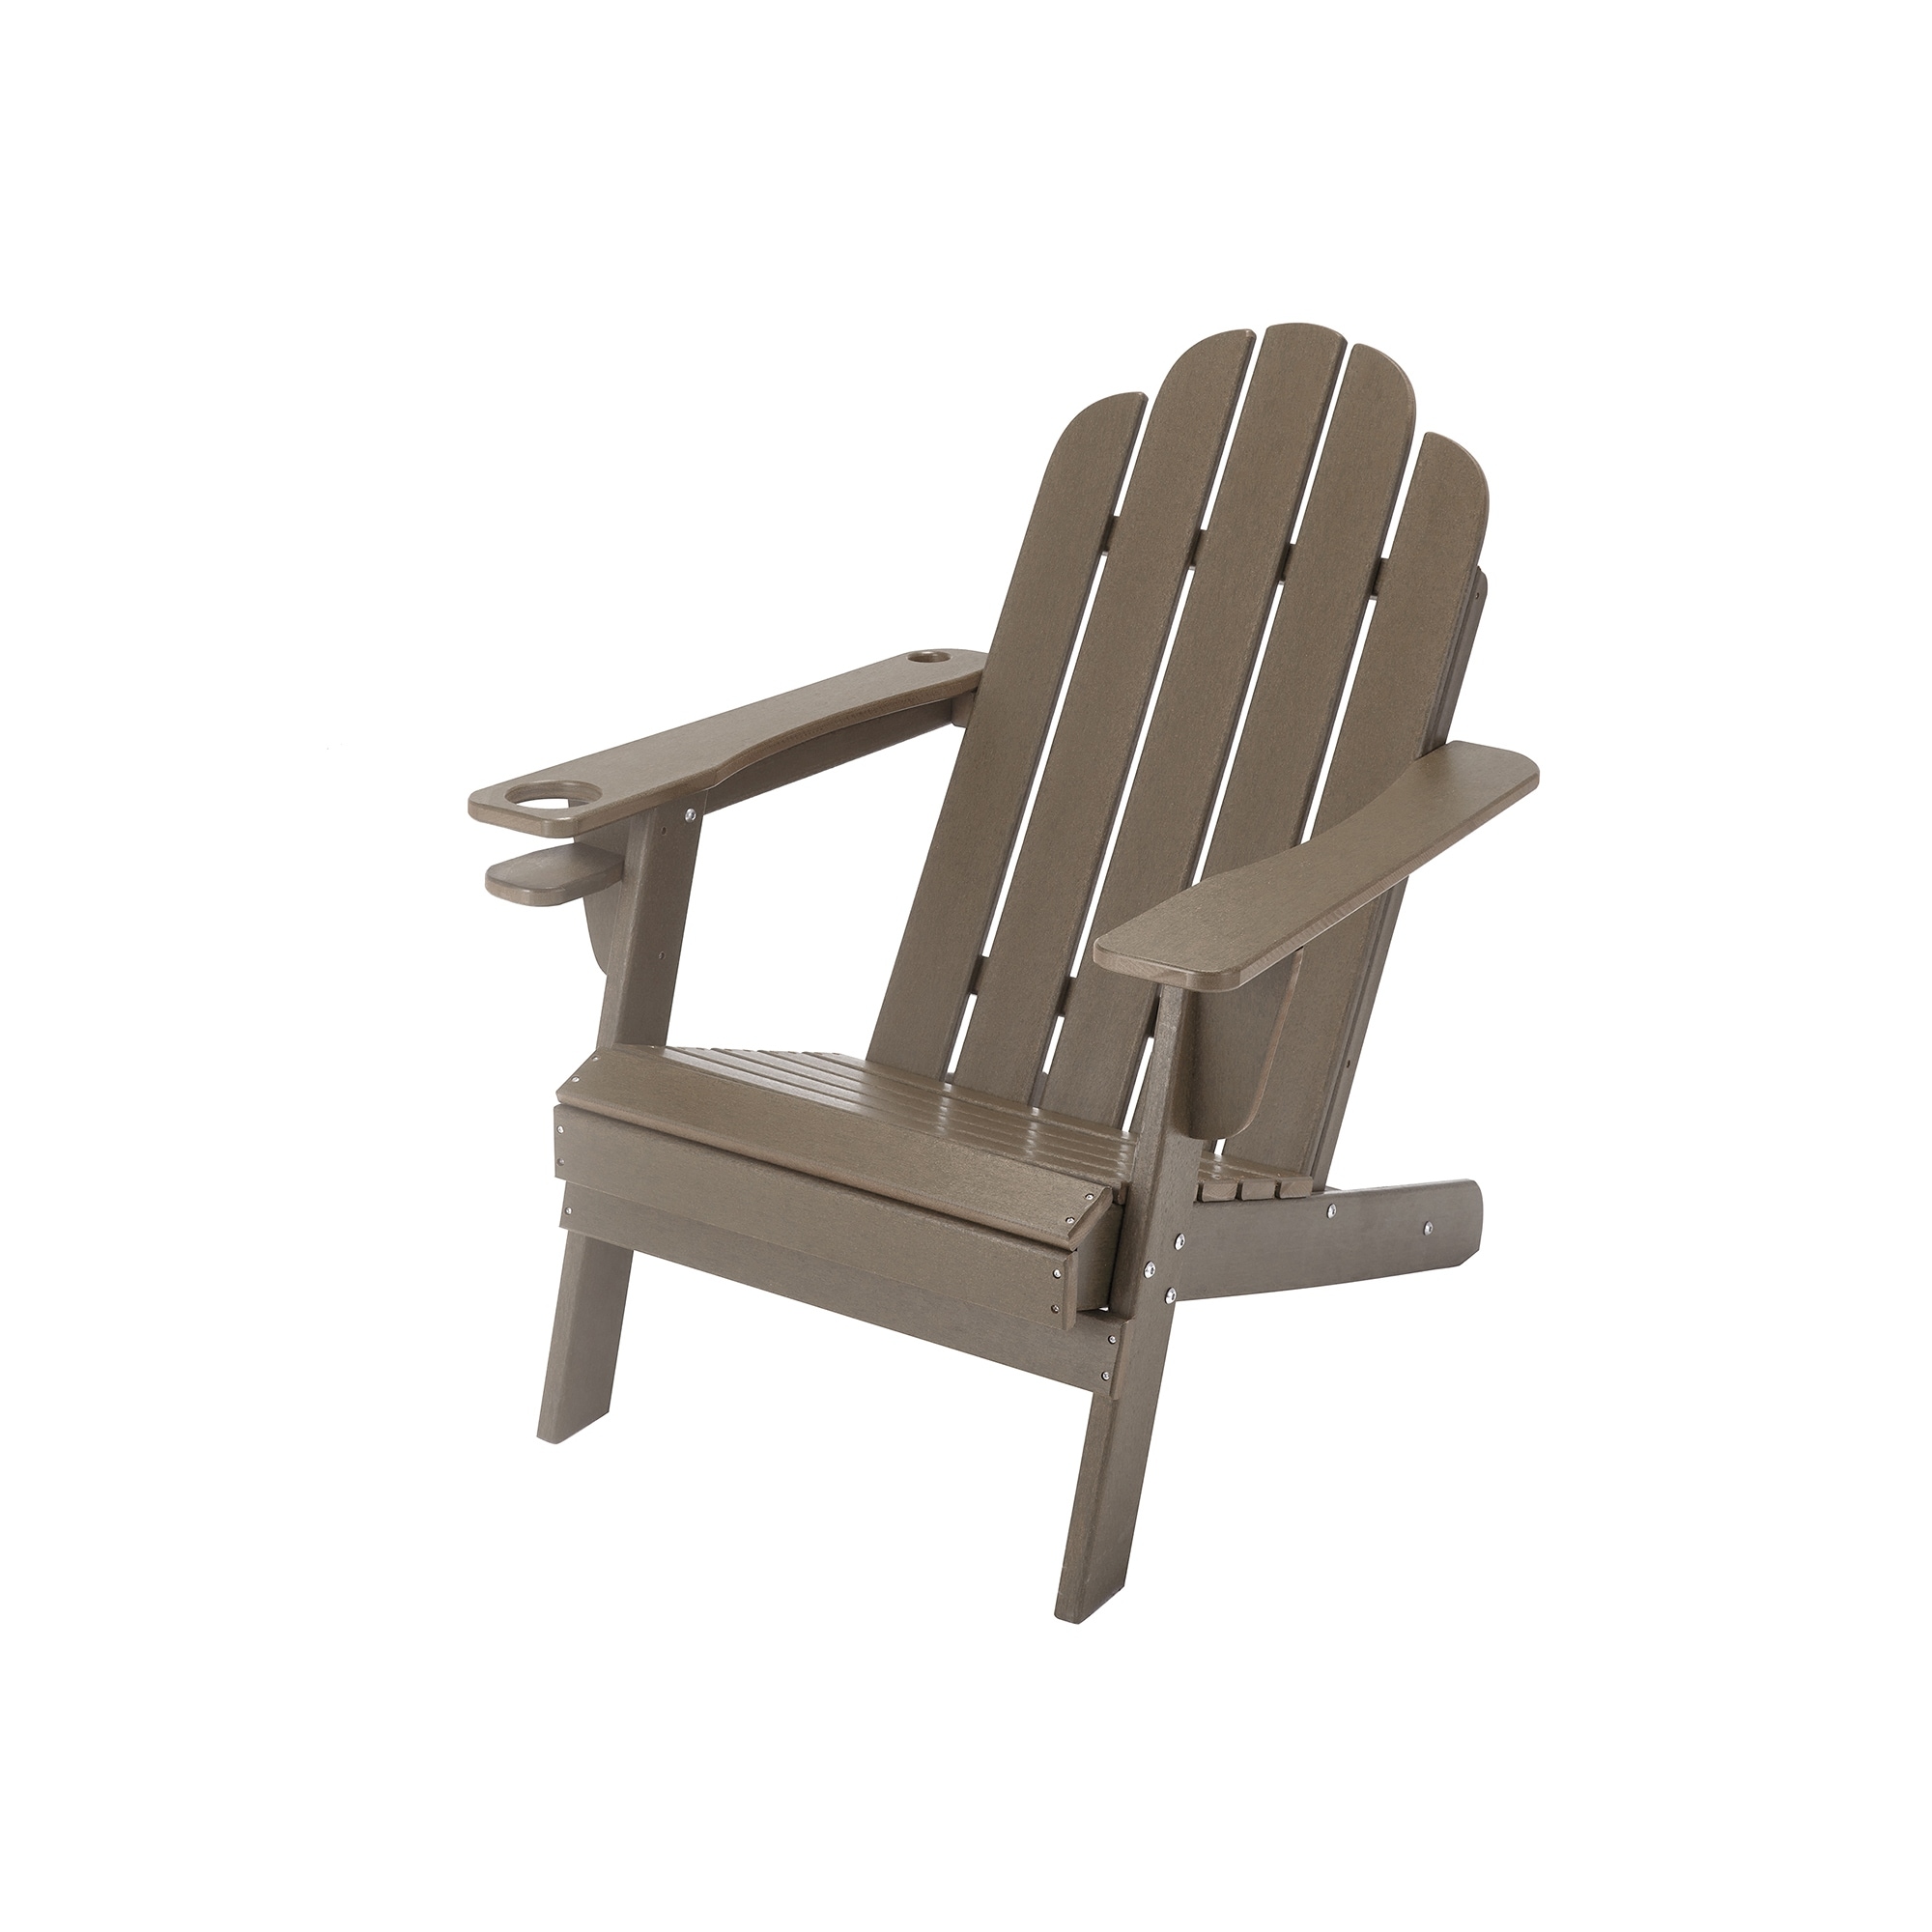 Casainc Traditional Curveback Plastic Patio Adirondack Chair With Cup Holder And Umbrella Holder Outdoor